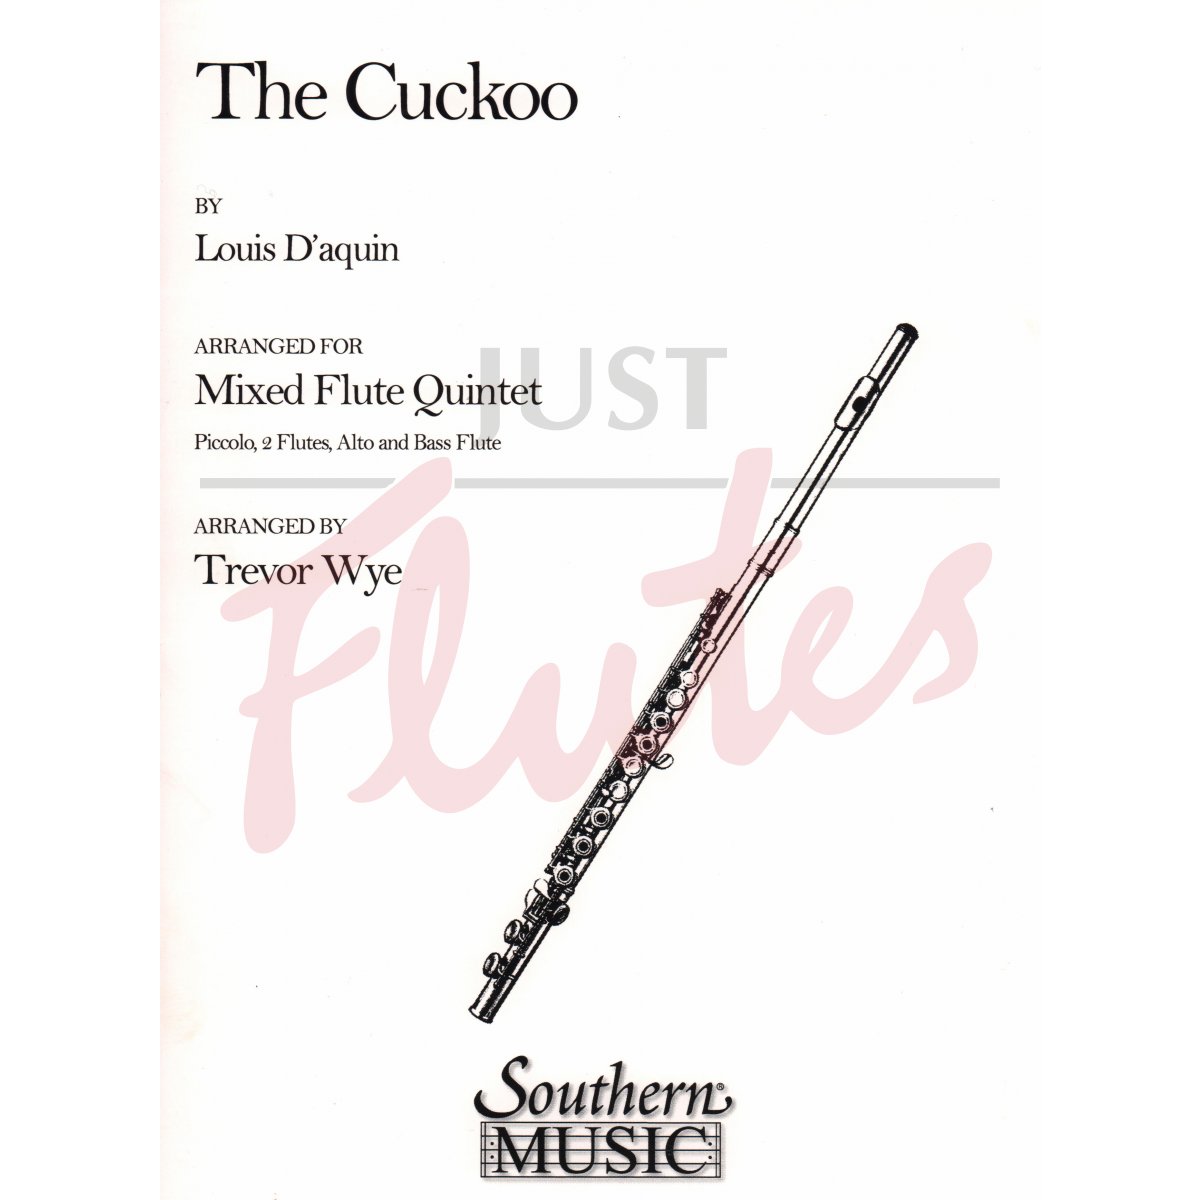 The Cuckoo for Mixed Flute Quintet